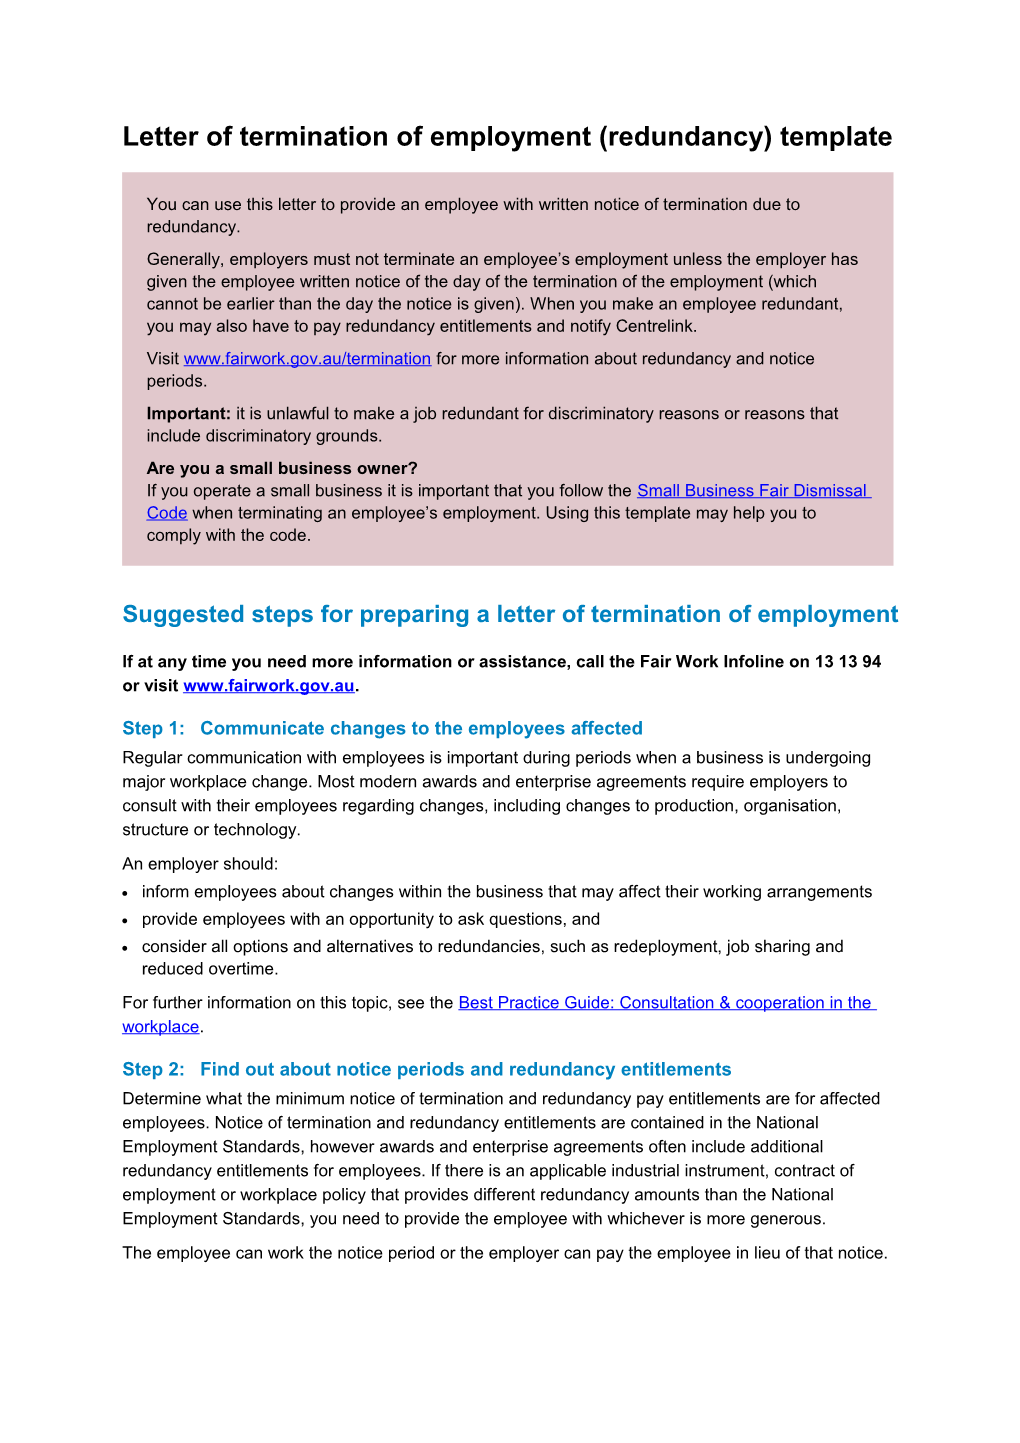 Letter of Termination of Employment (Redundancy) Template